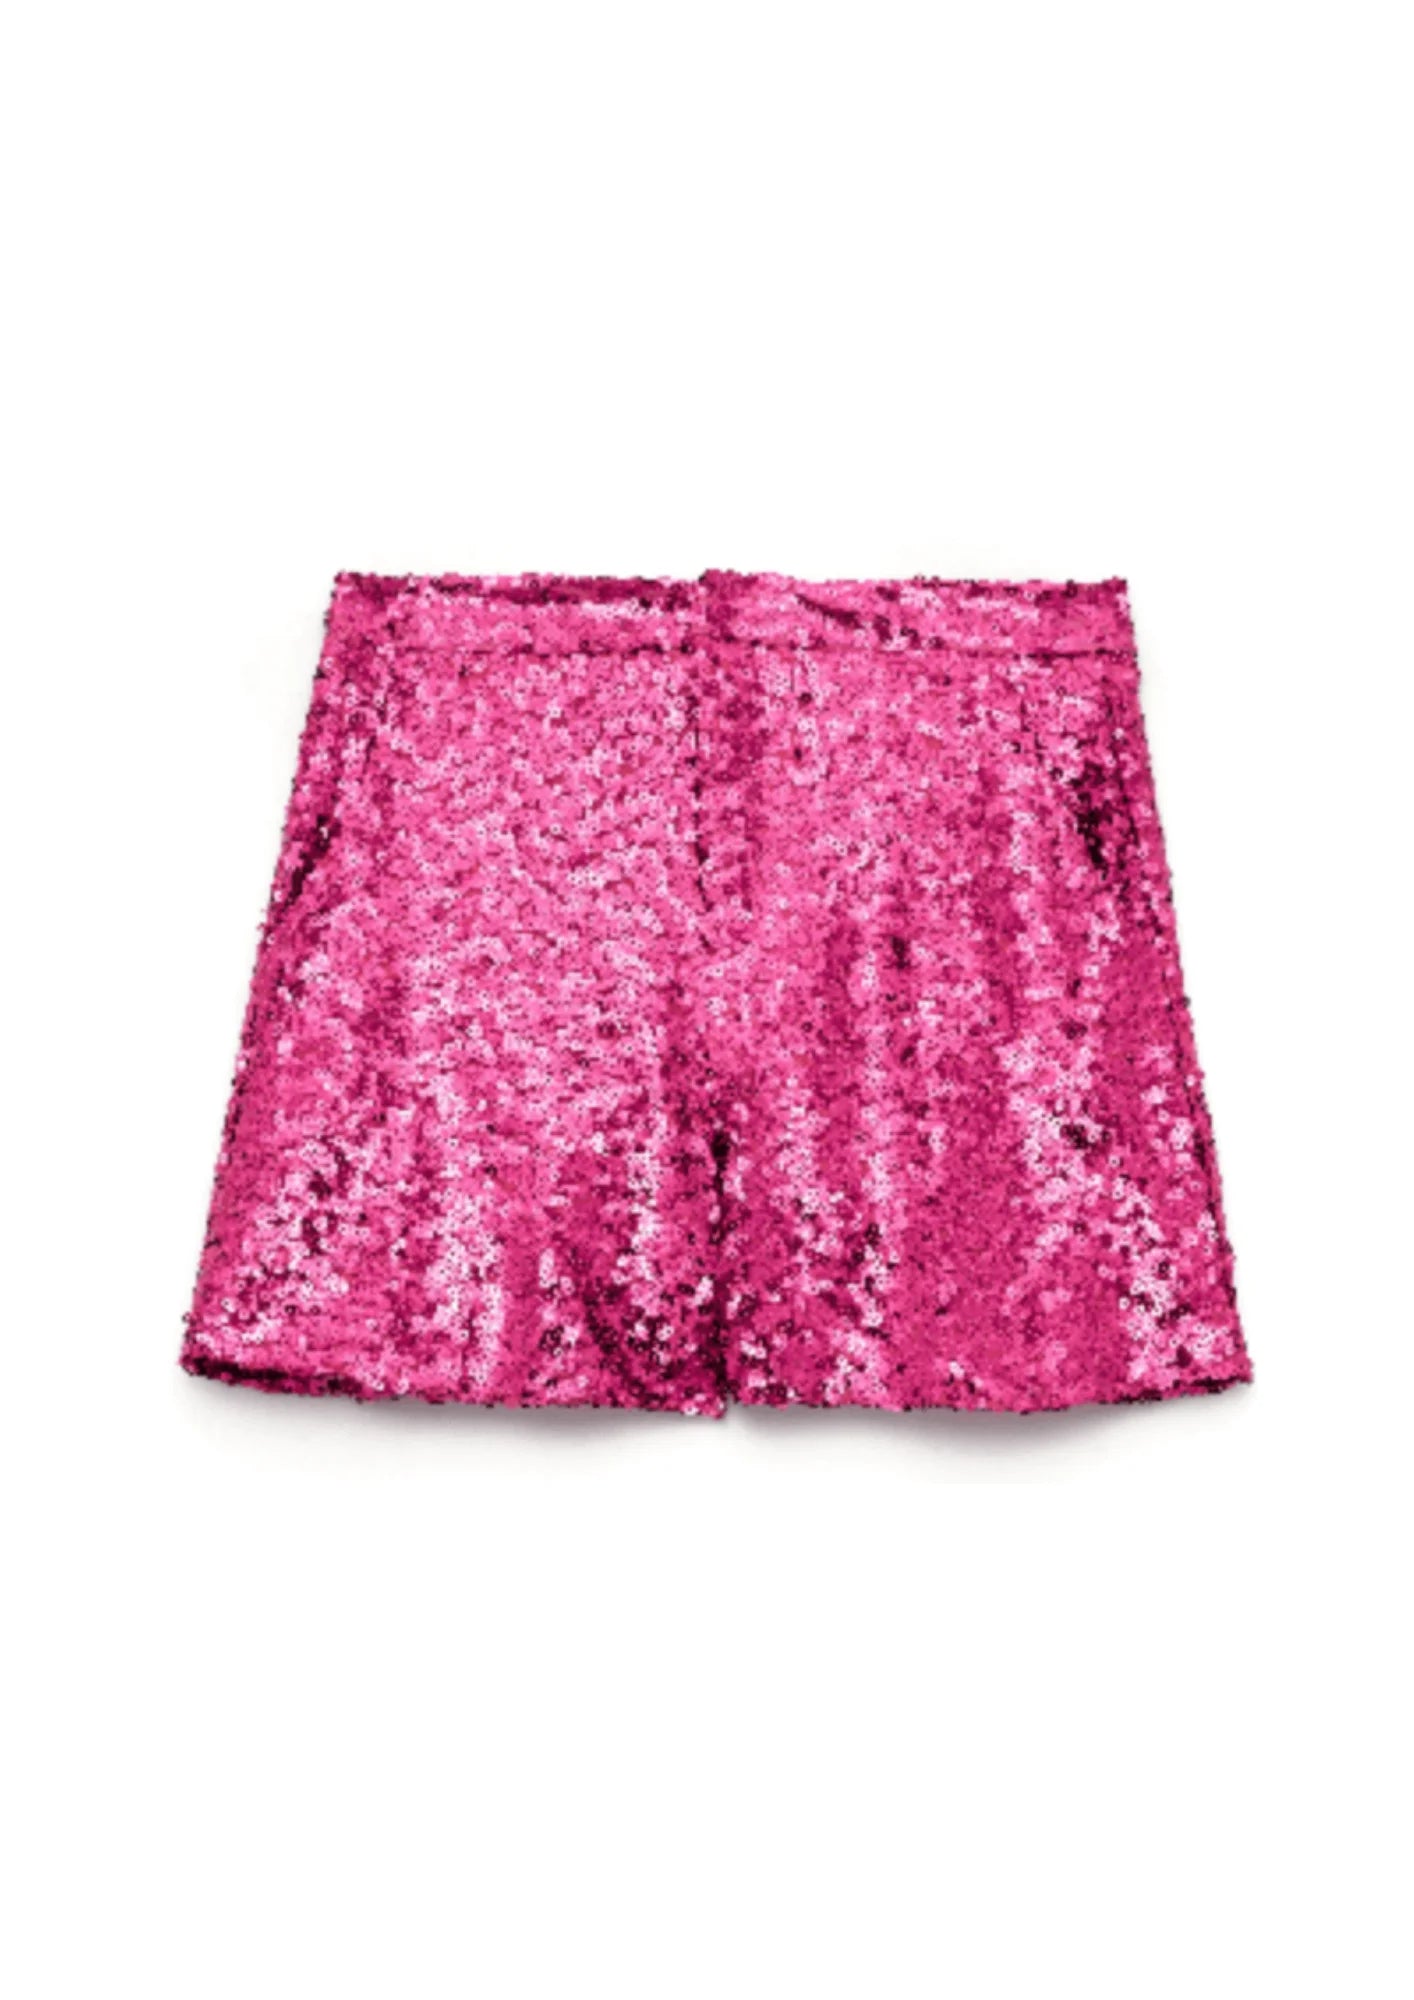 PINK SEQUINED SHORTS